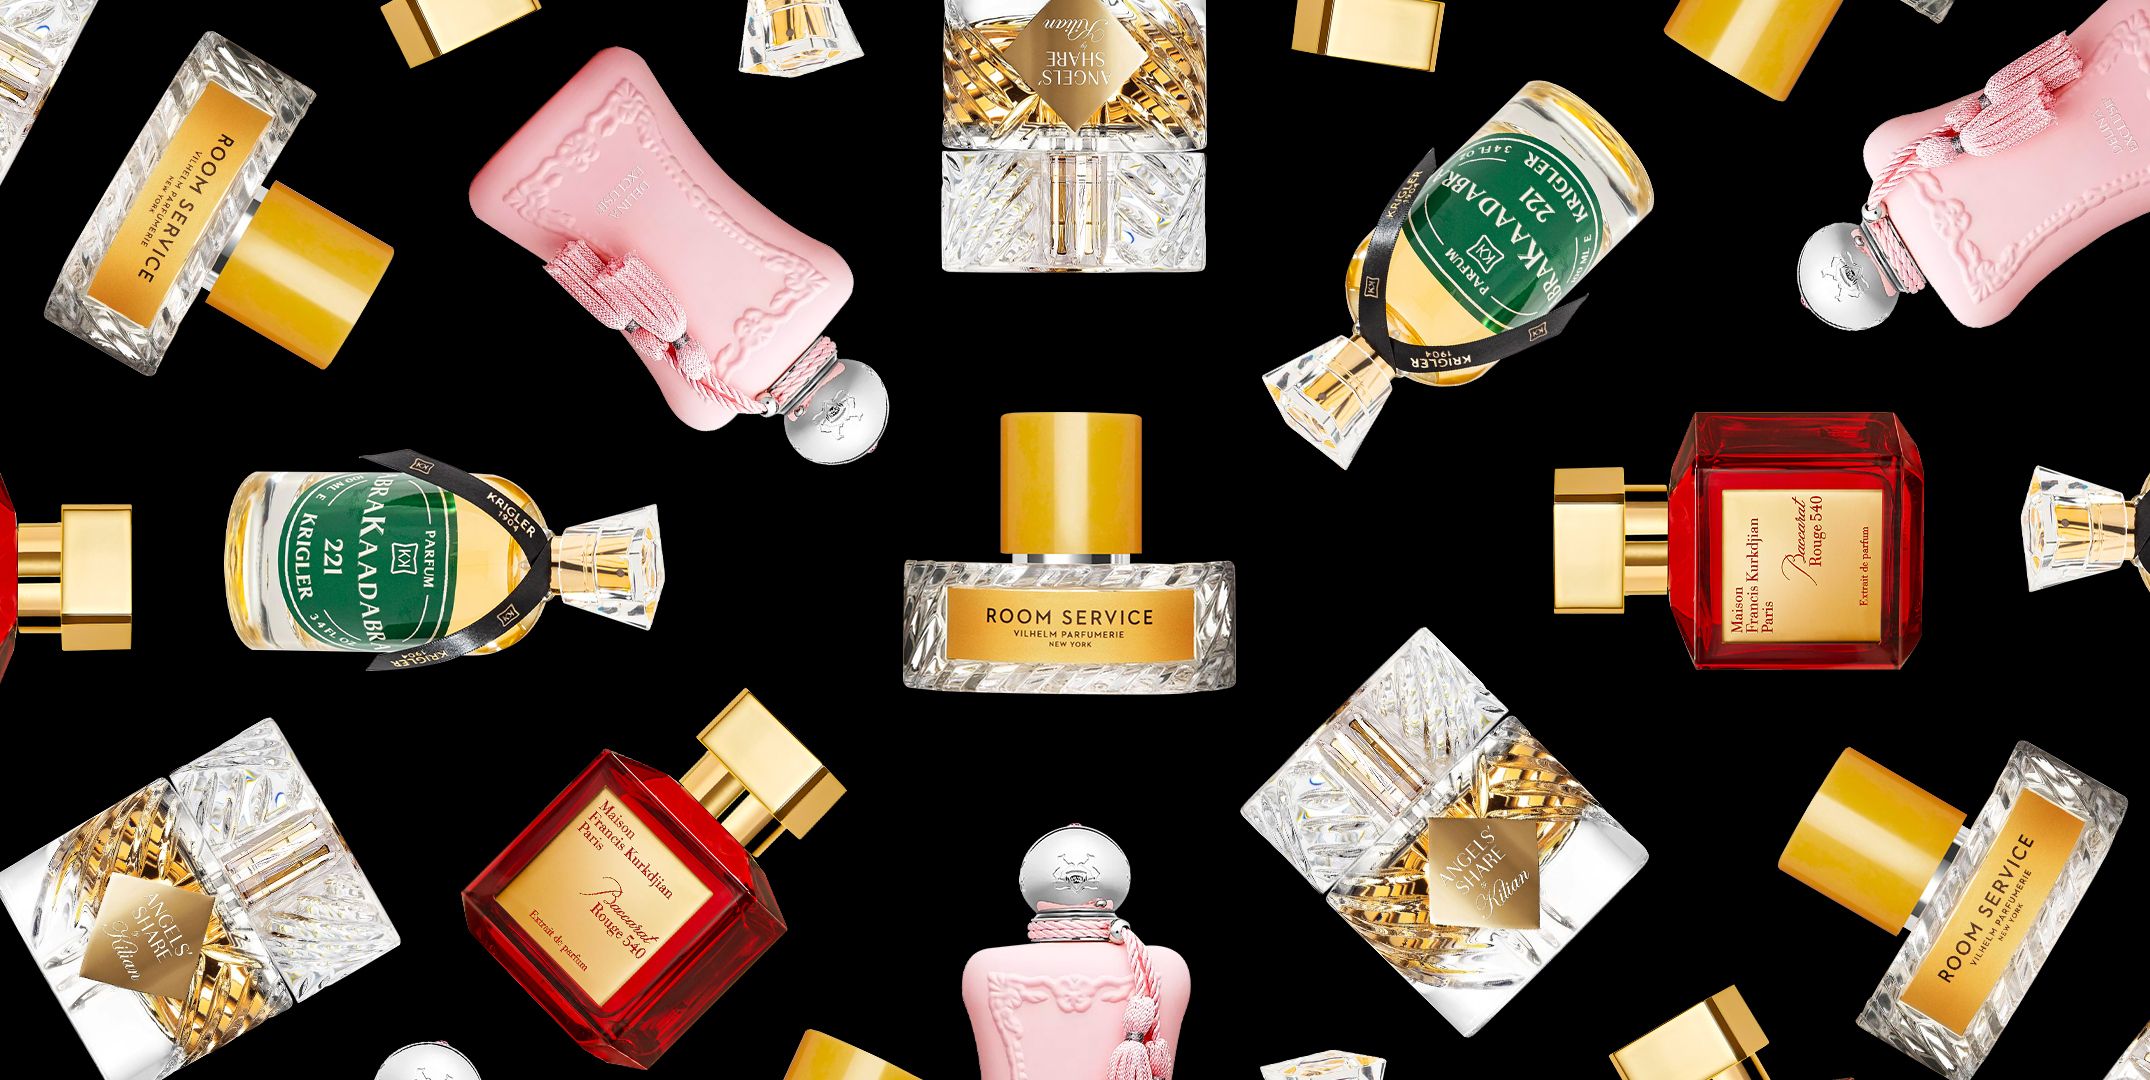 Top 10 best-selling perfumes for women in the world 2023 by